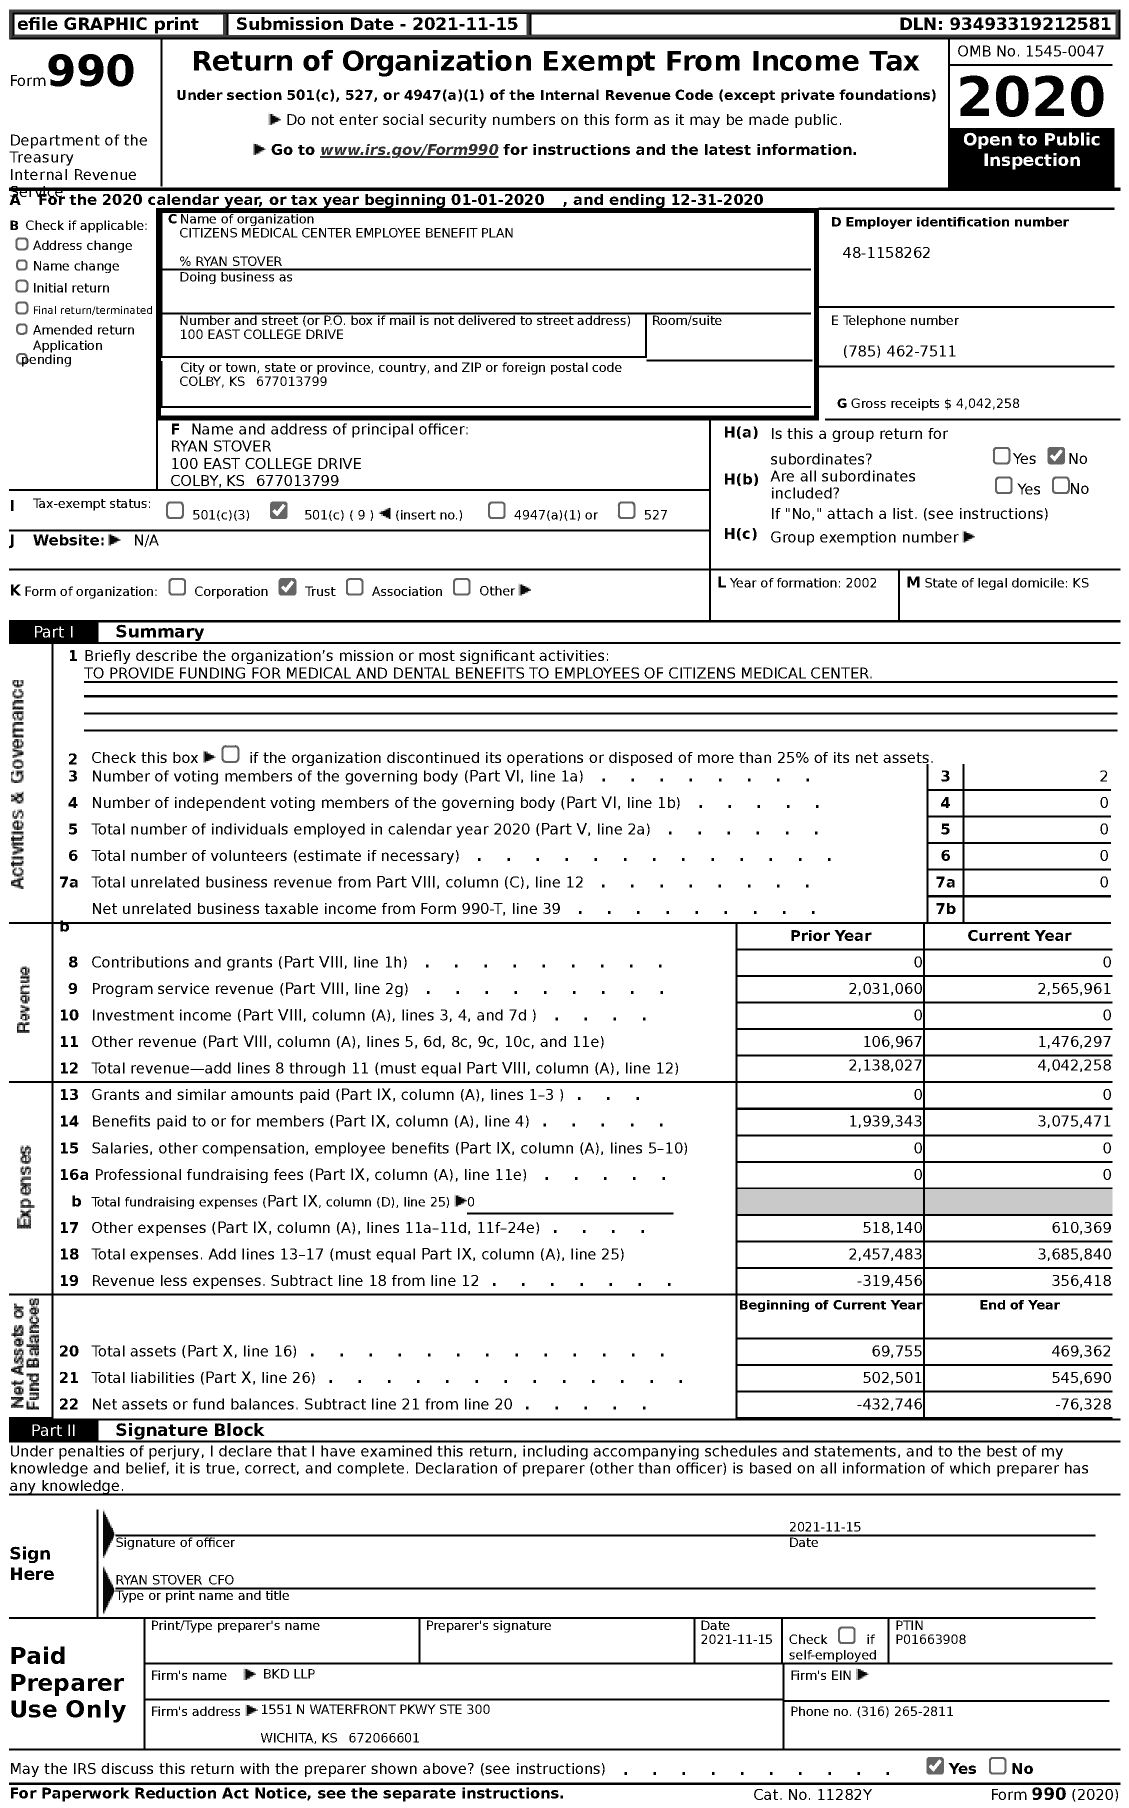 Image of first page of 2020 Form 990 for Citizens Medical Center Employee Benefit Plan